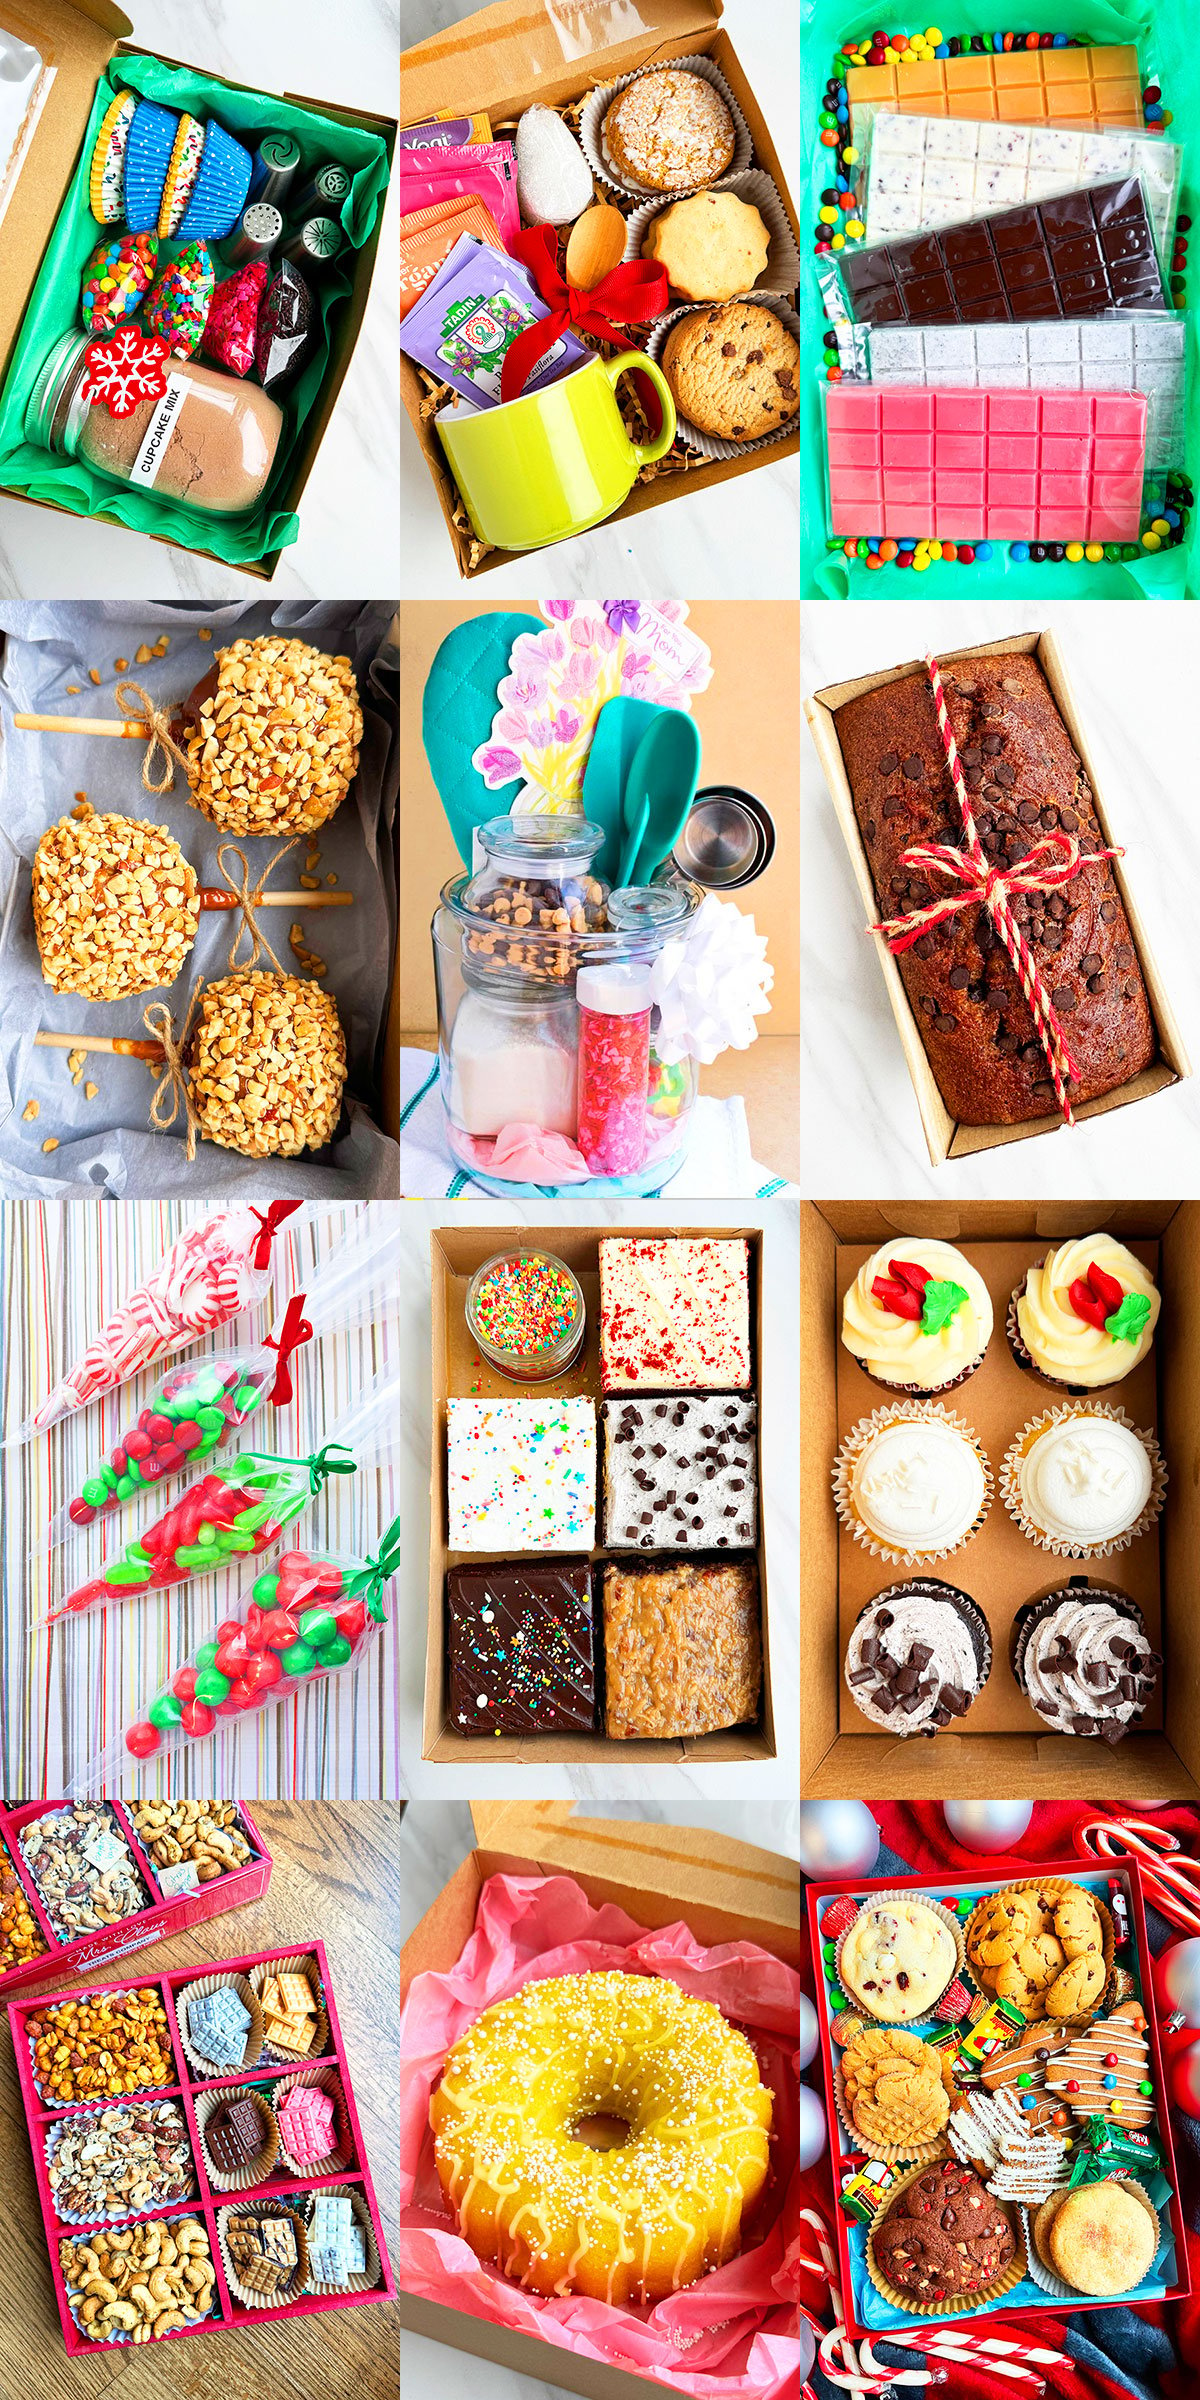 Perfect Homemade Food Gifts for the Holidays - Aberle Home